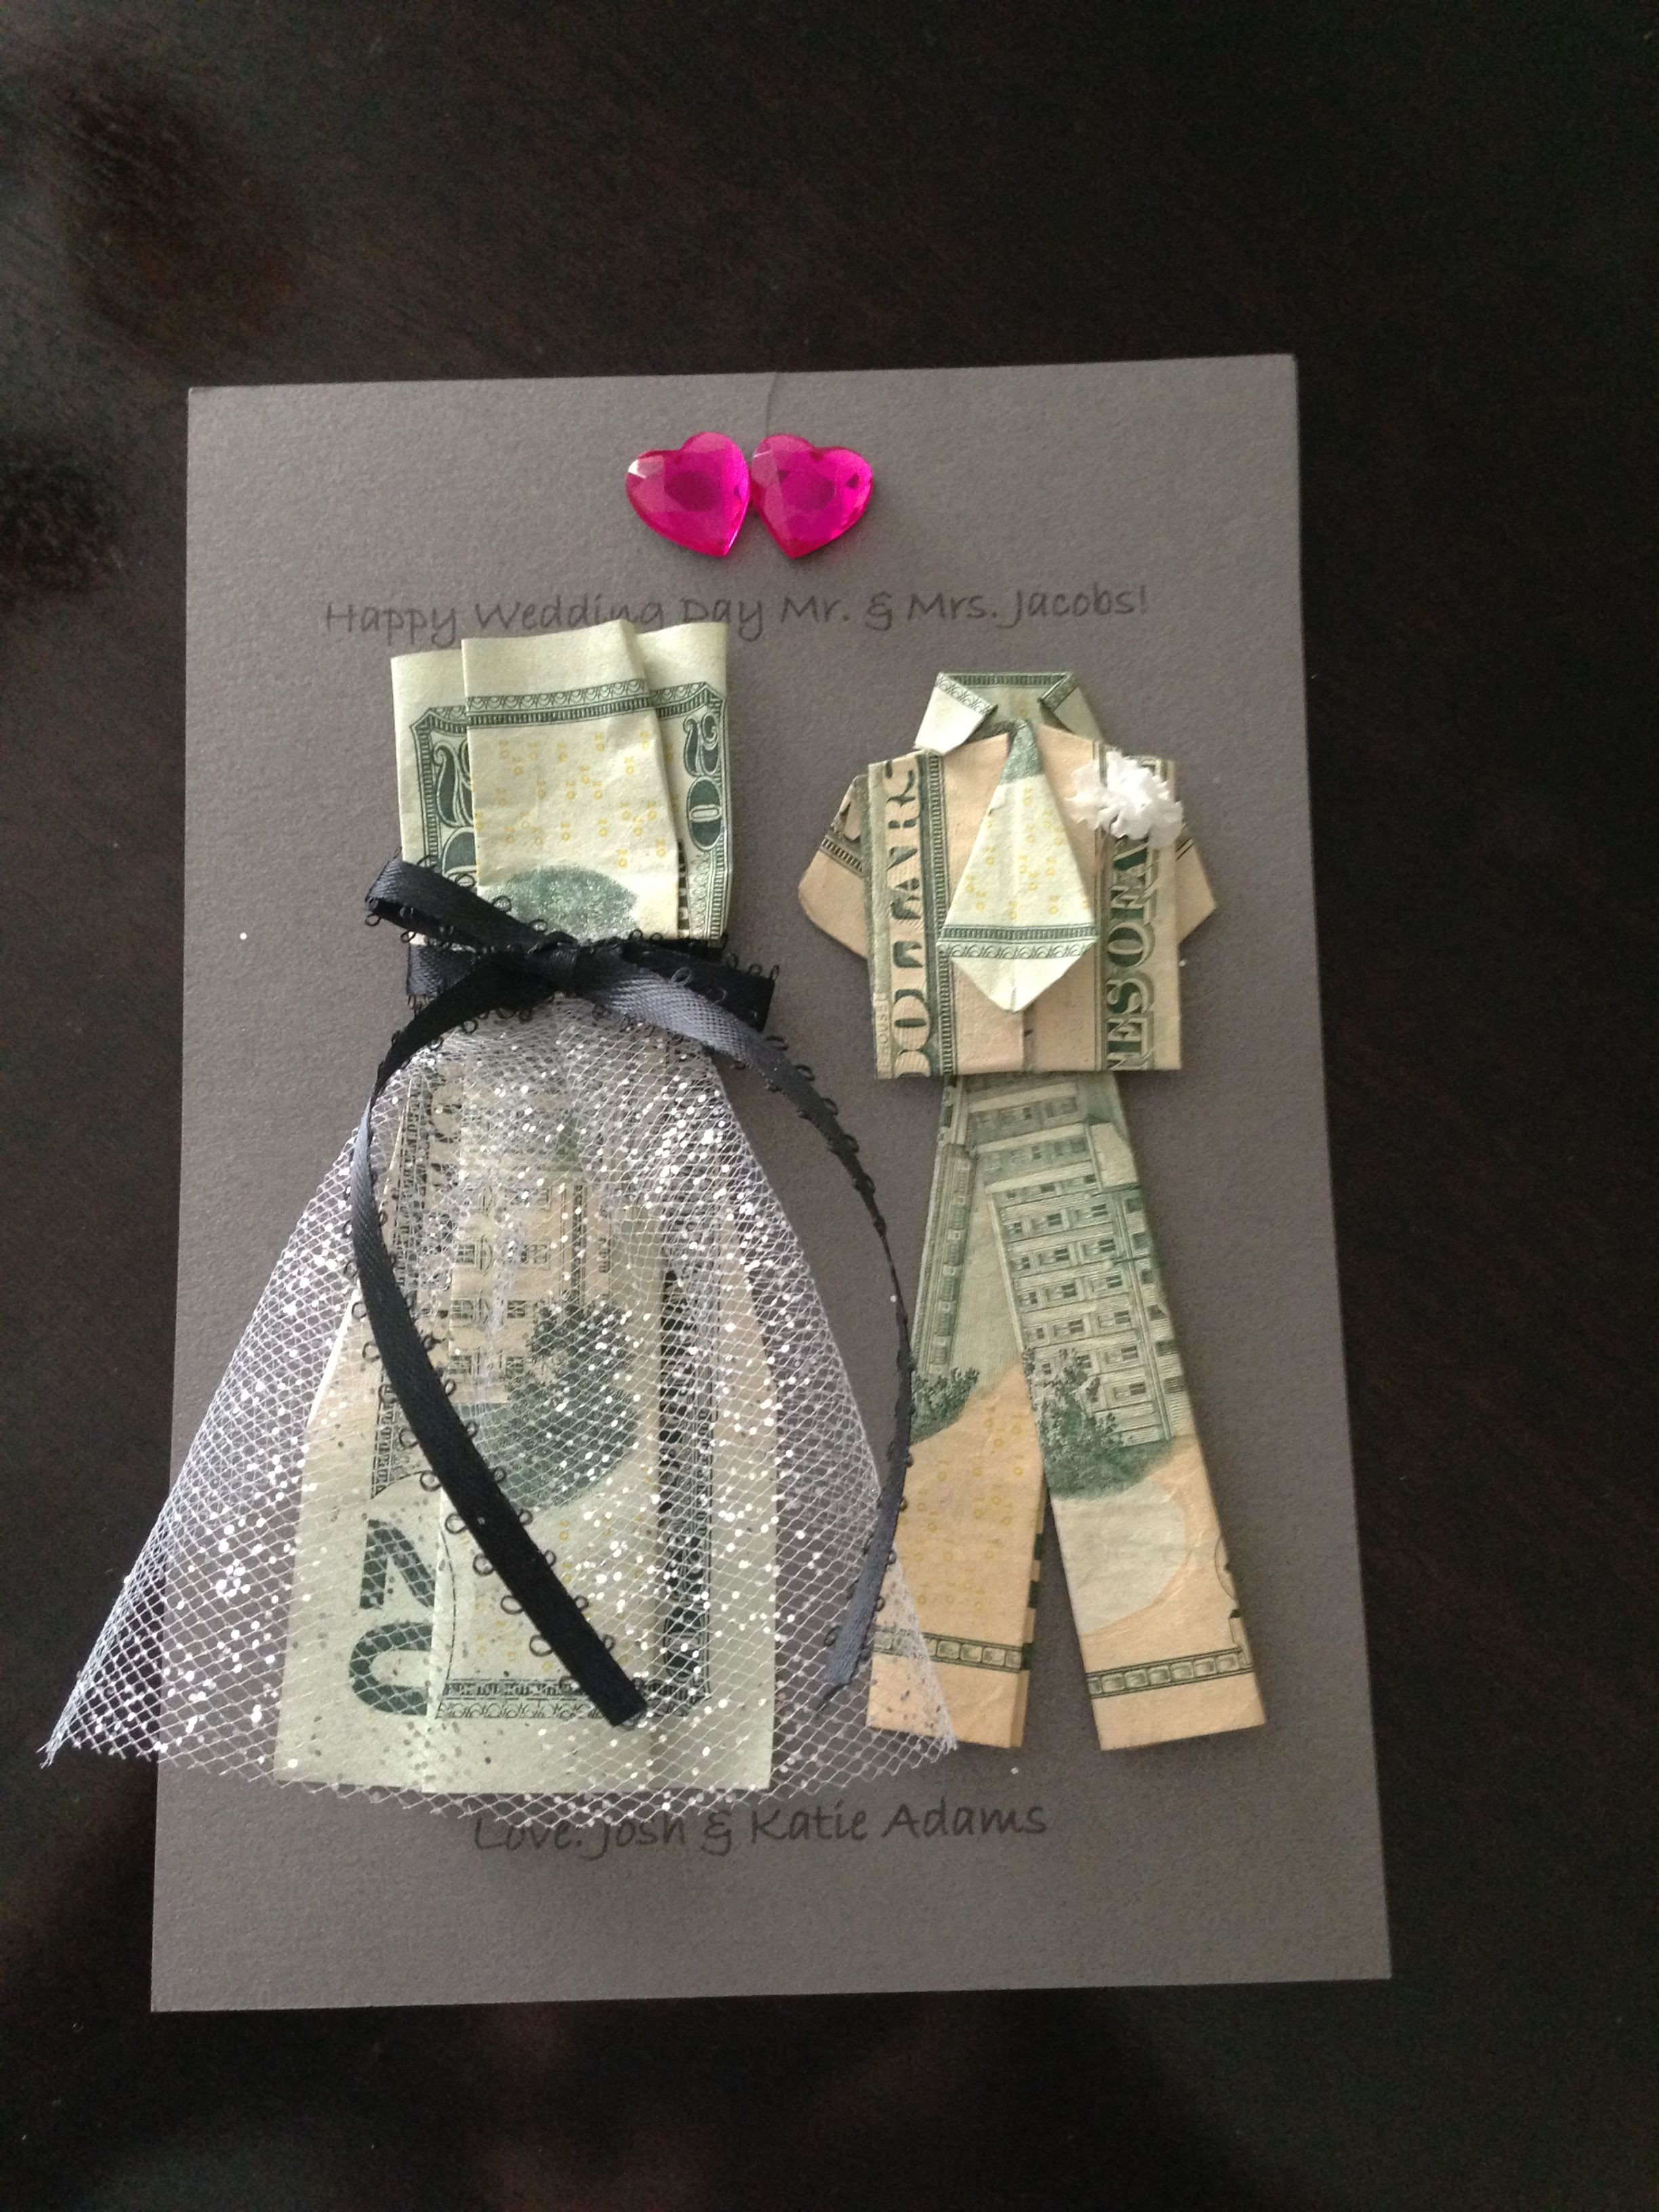 Wedding Gift Ideas For Bride And Groom Who Have Everything
 Wedding Money Gifts on Pinterest